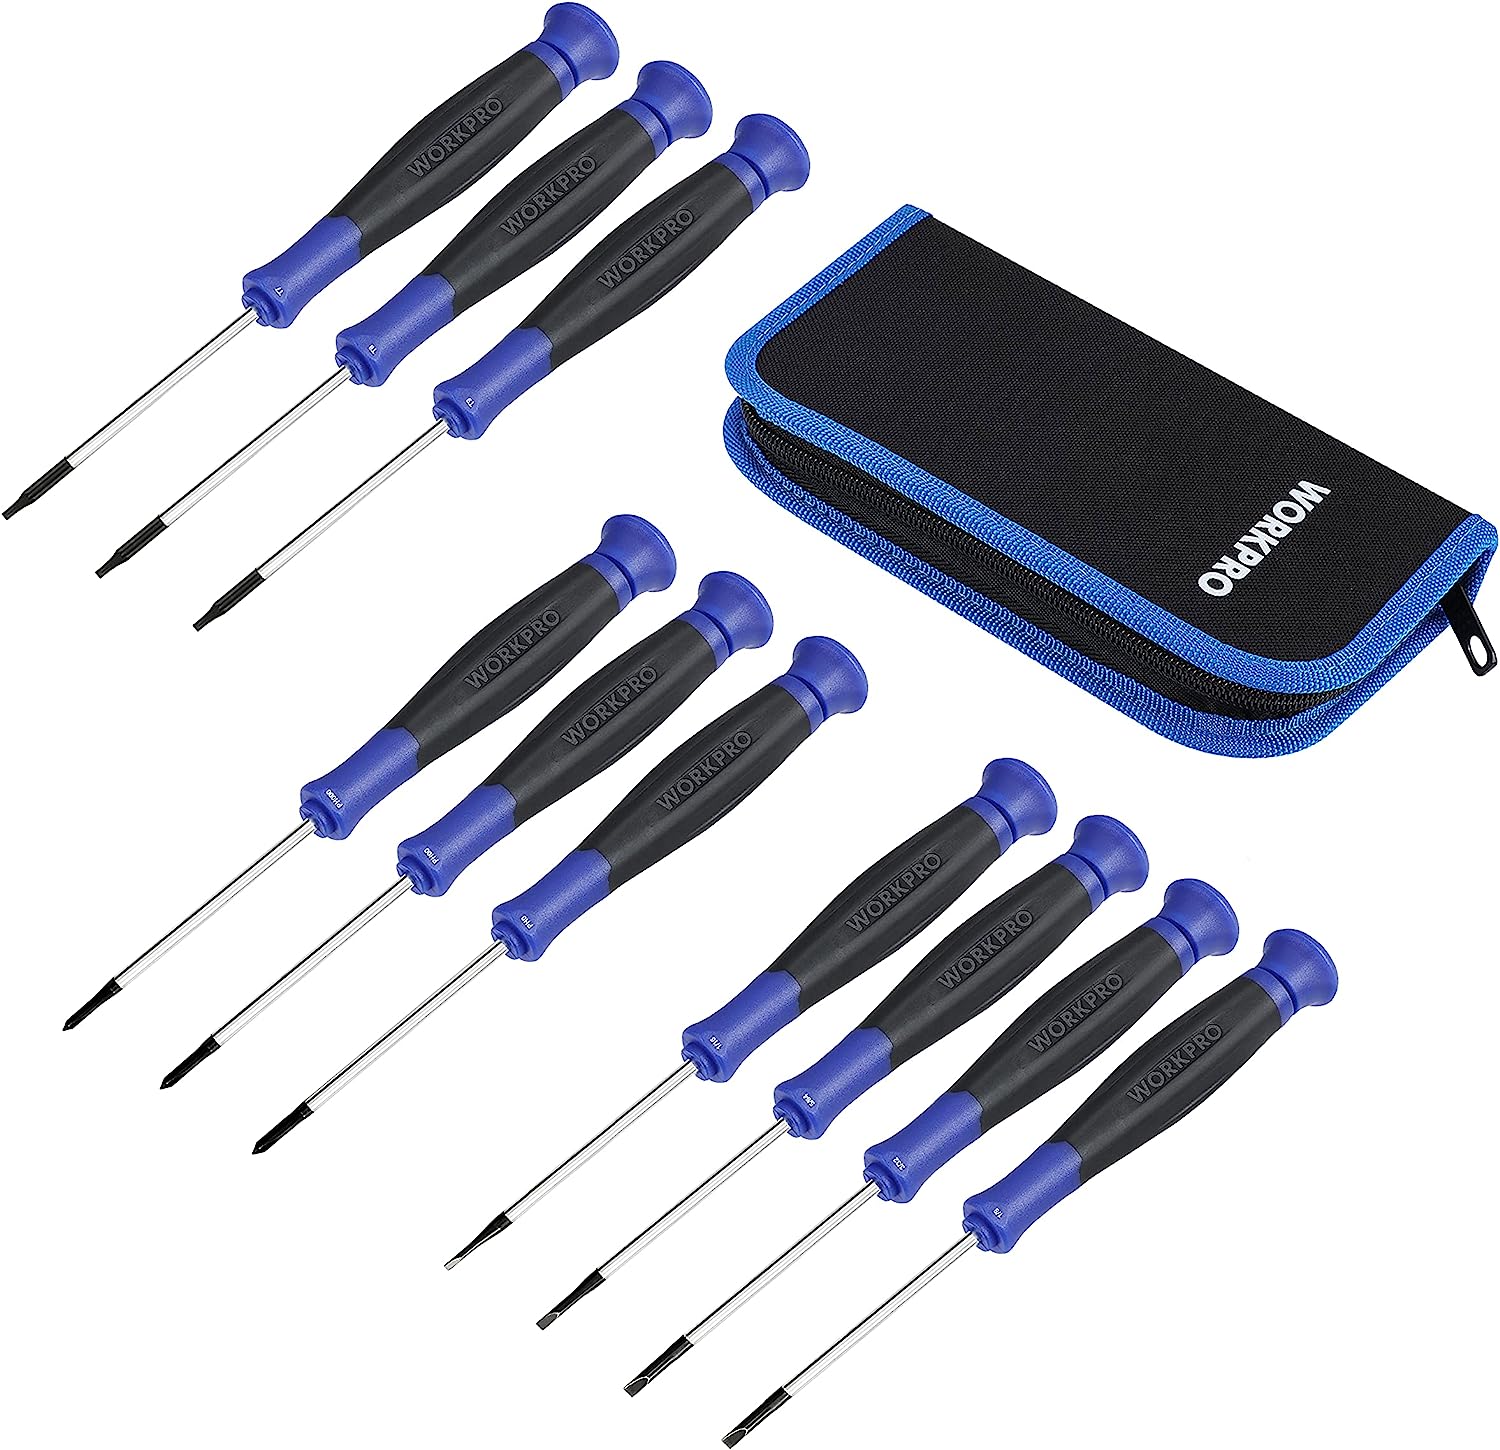 WORKPRO 10-Piece Precision Screwdriver Set with Pouch, [...]